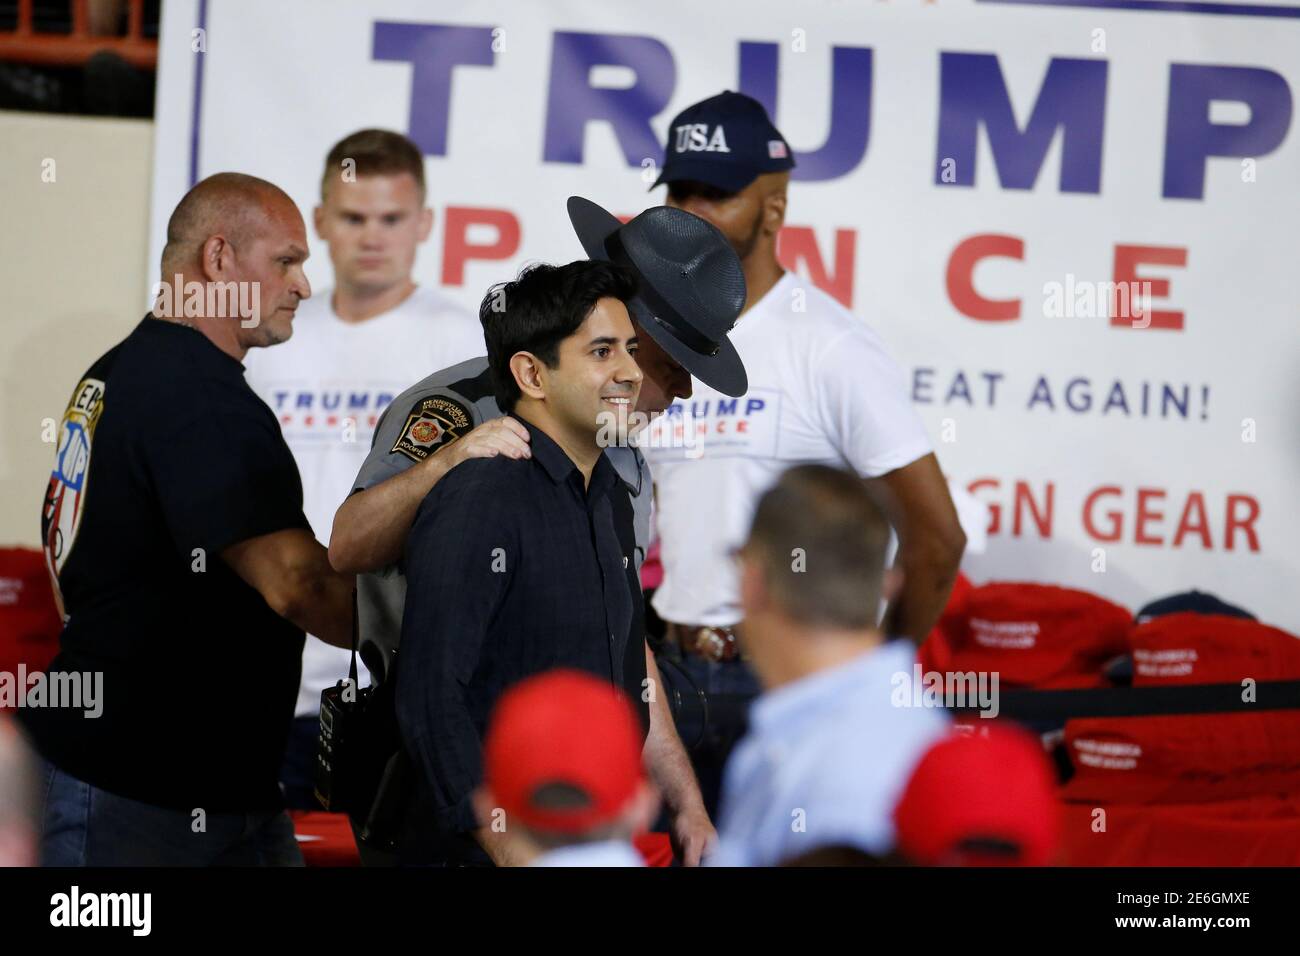 A protester is ejected by a Bikers for Trump member and law enforcement officer as U.S. President Donald Trump appears on stage at a rally in Harrisburg, Pennsylvania, U.S. April 29, 2017.   REUTERS/Carlo Allegri Stock Photo